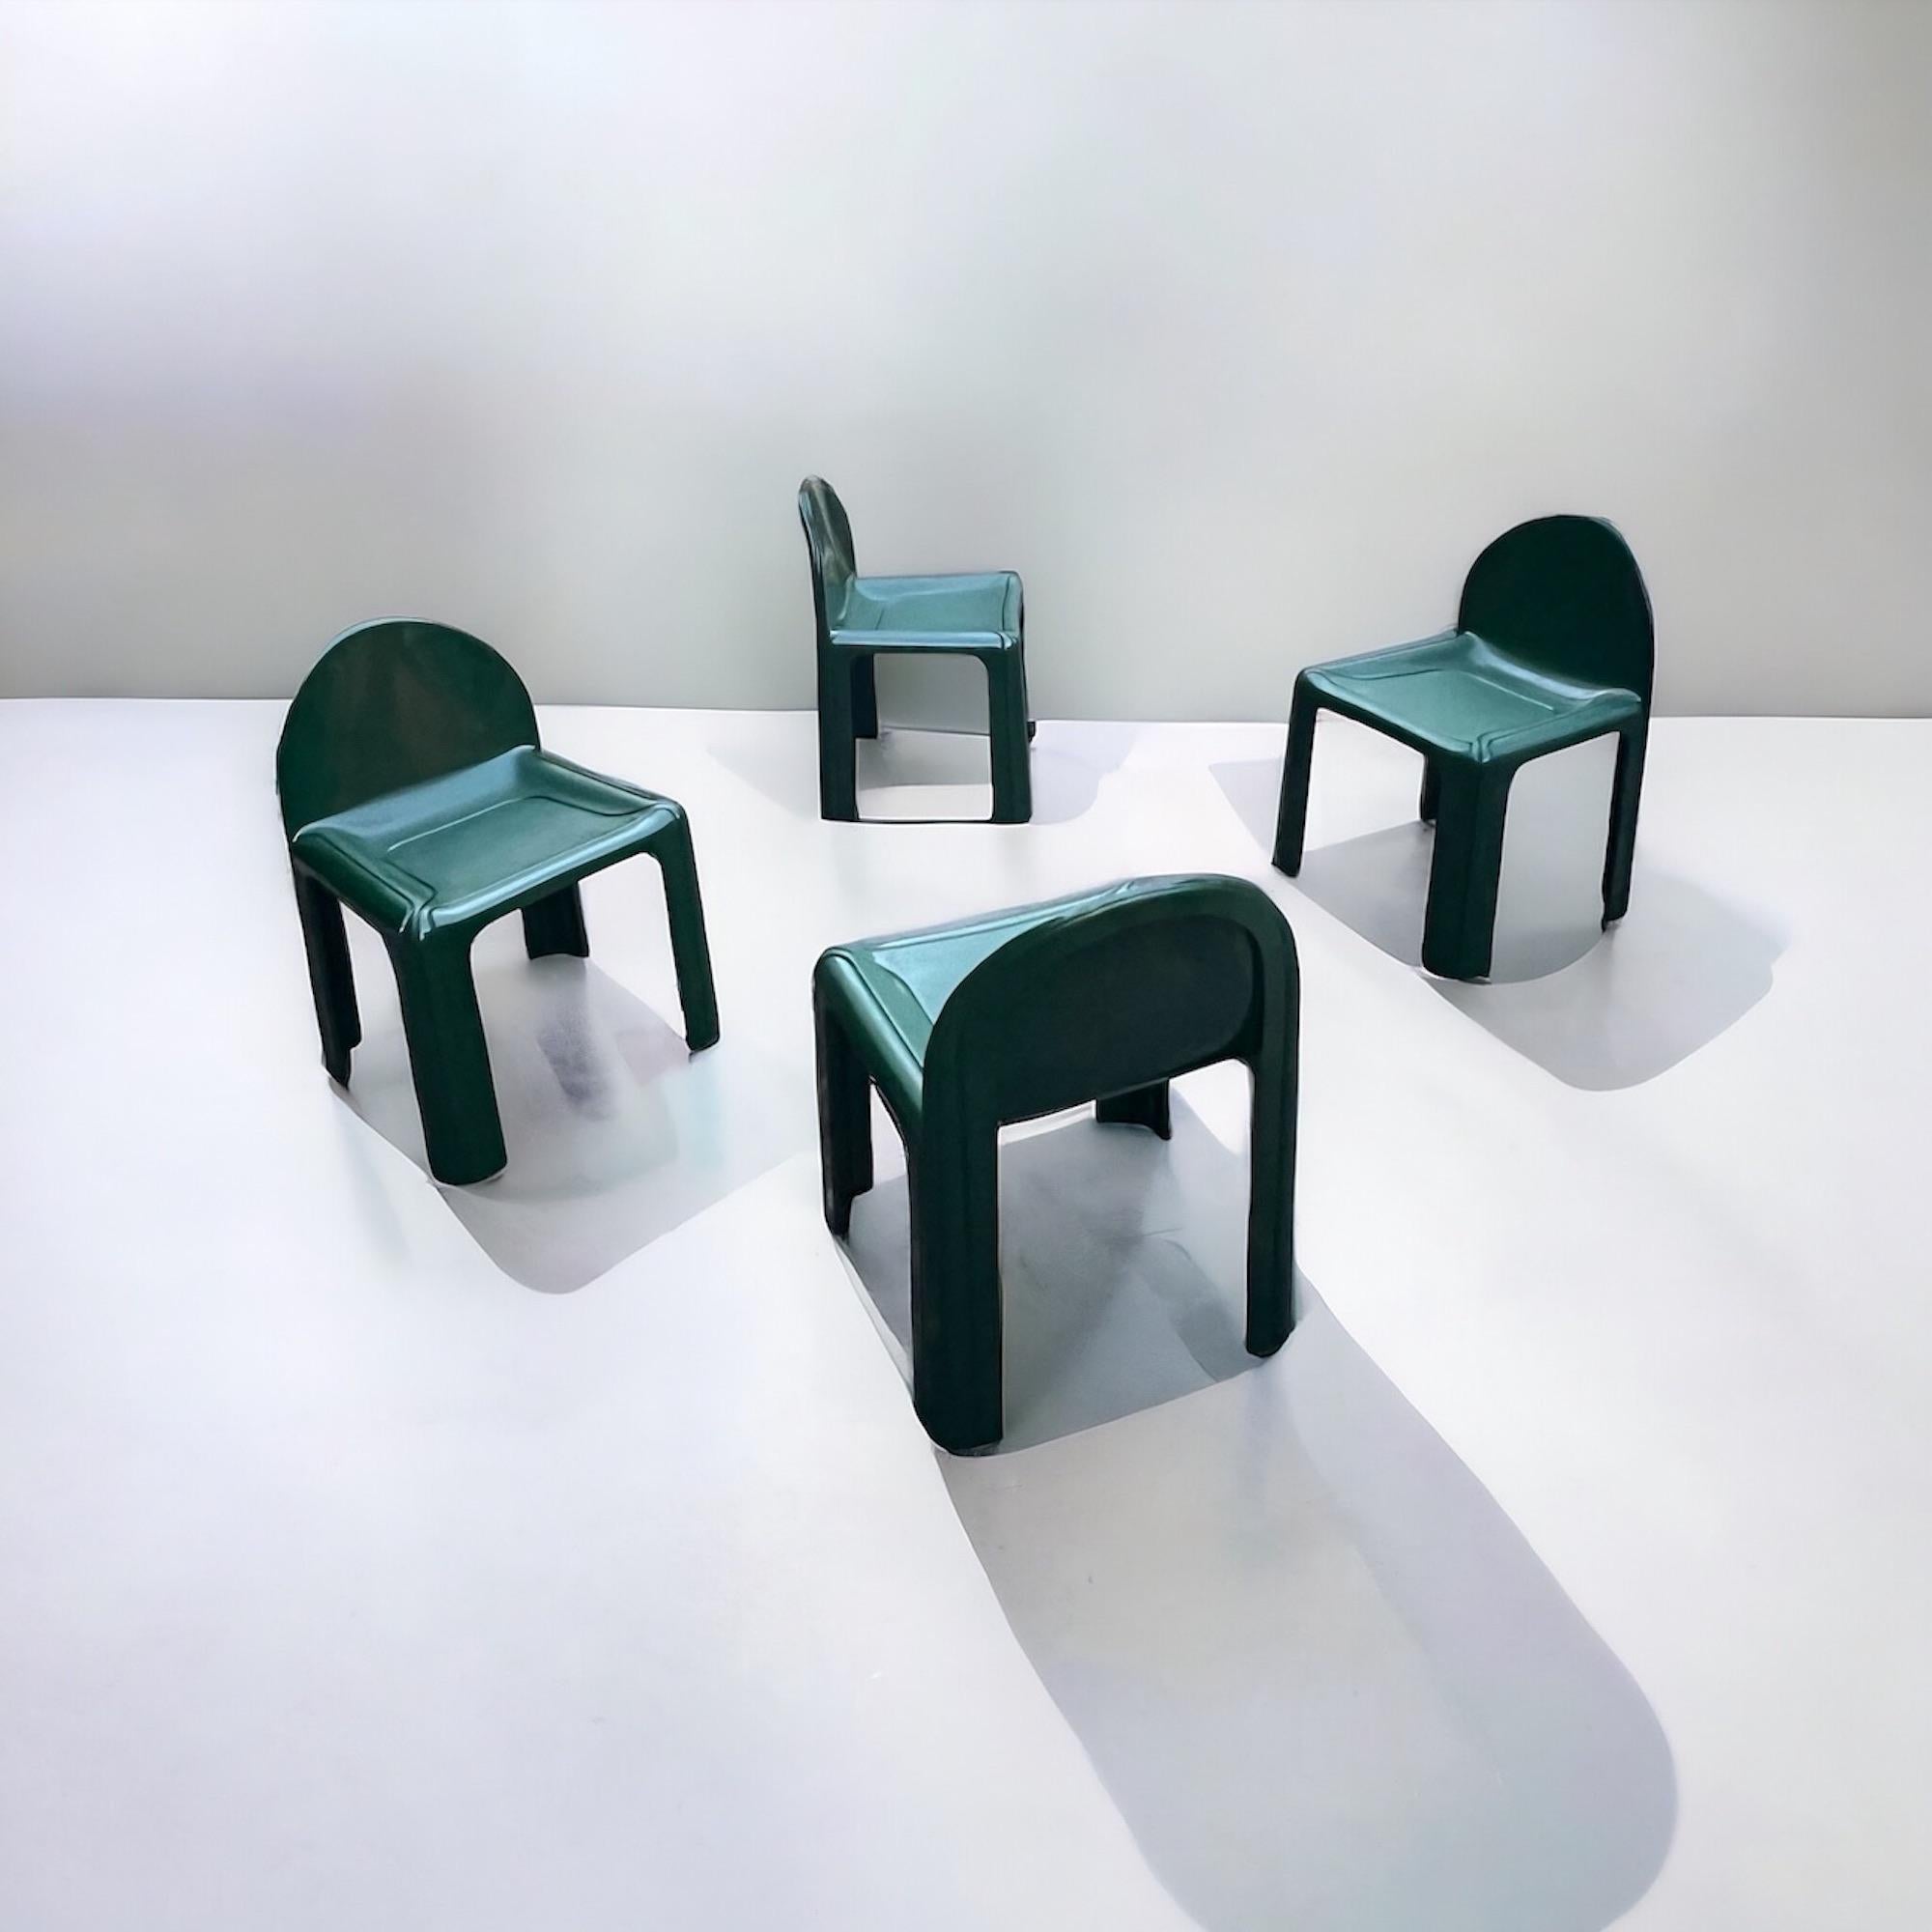 Set of 4 Green Resin Kartell Model 4854 Chairs by Gae Aulenti, 1960s For Sale 4